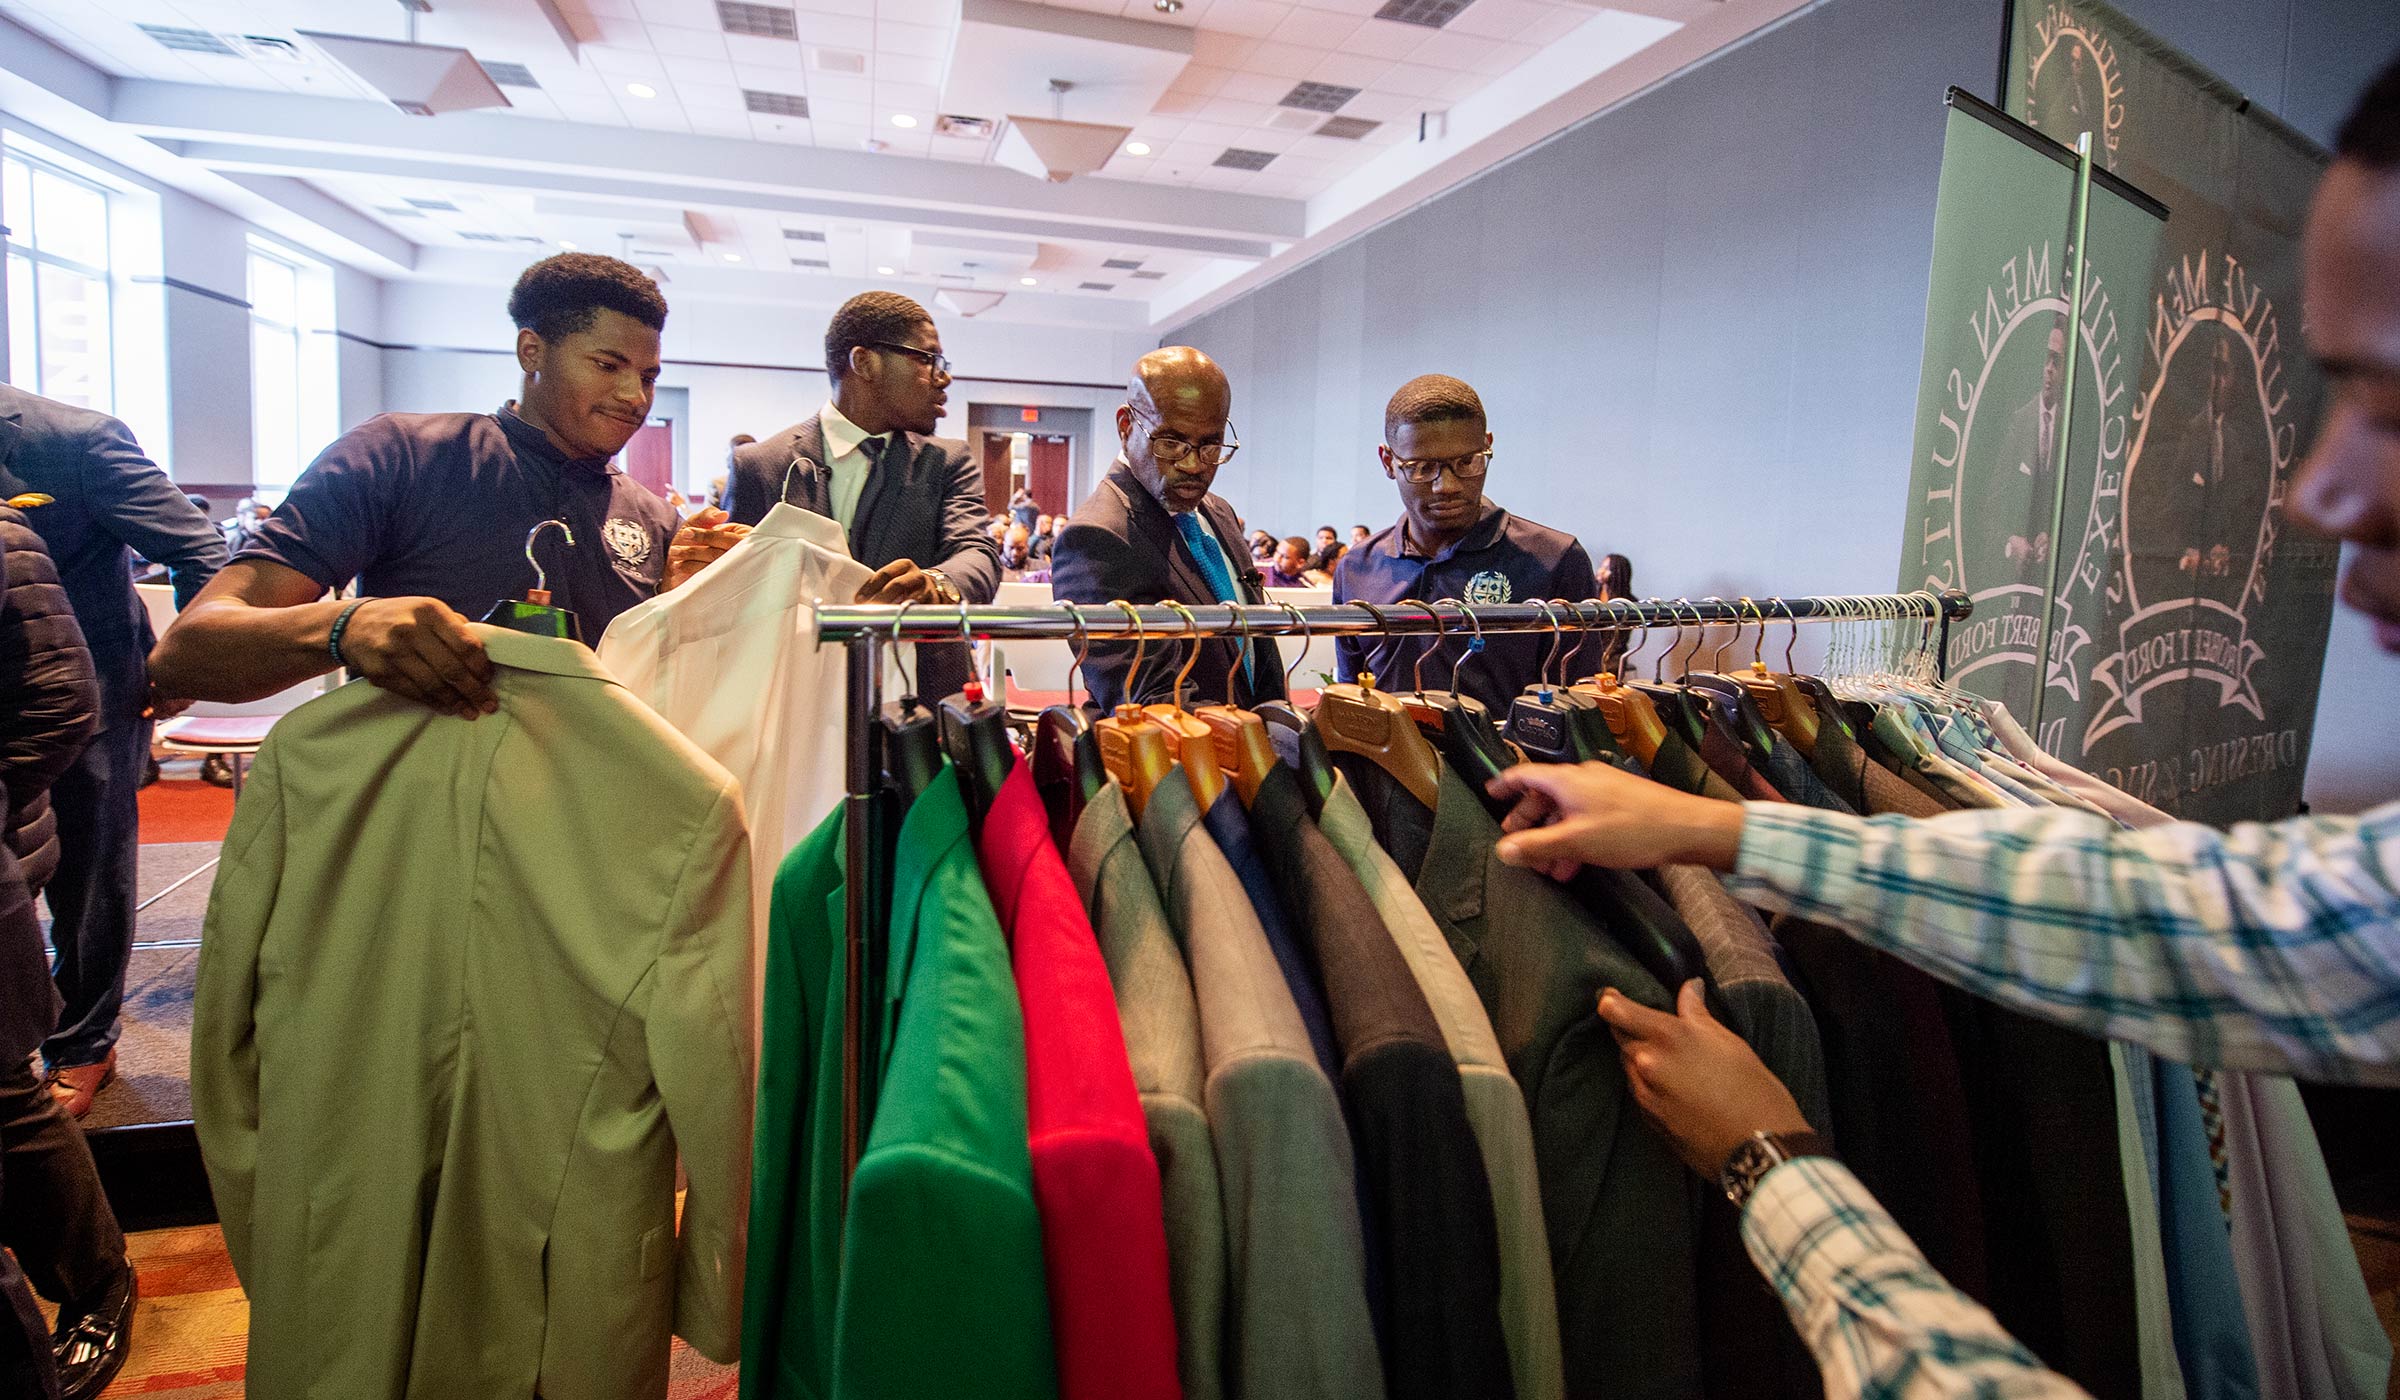 As part of the &quot;Dress for Success&quot; segment, MSU students pick through a rack of suits to find interview-appropriate attire.